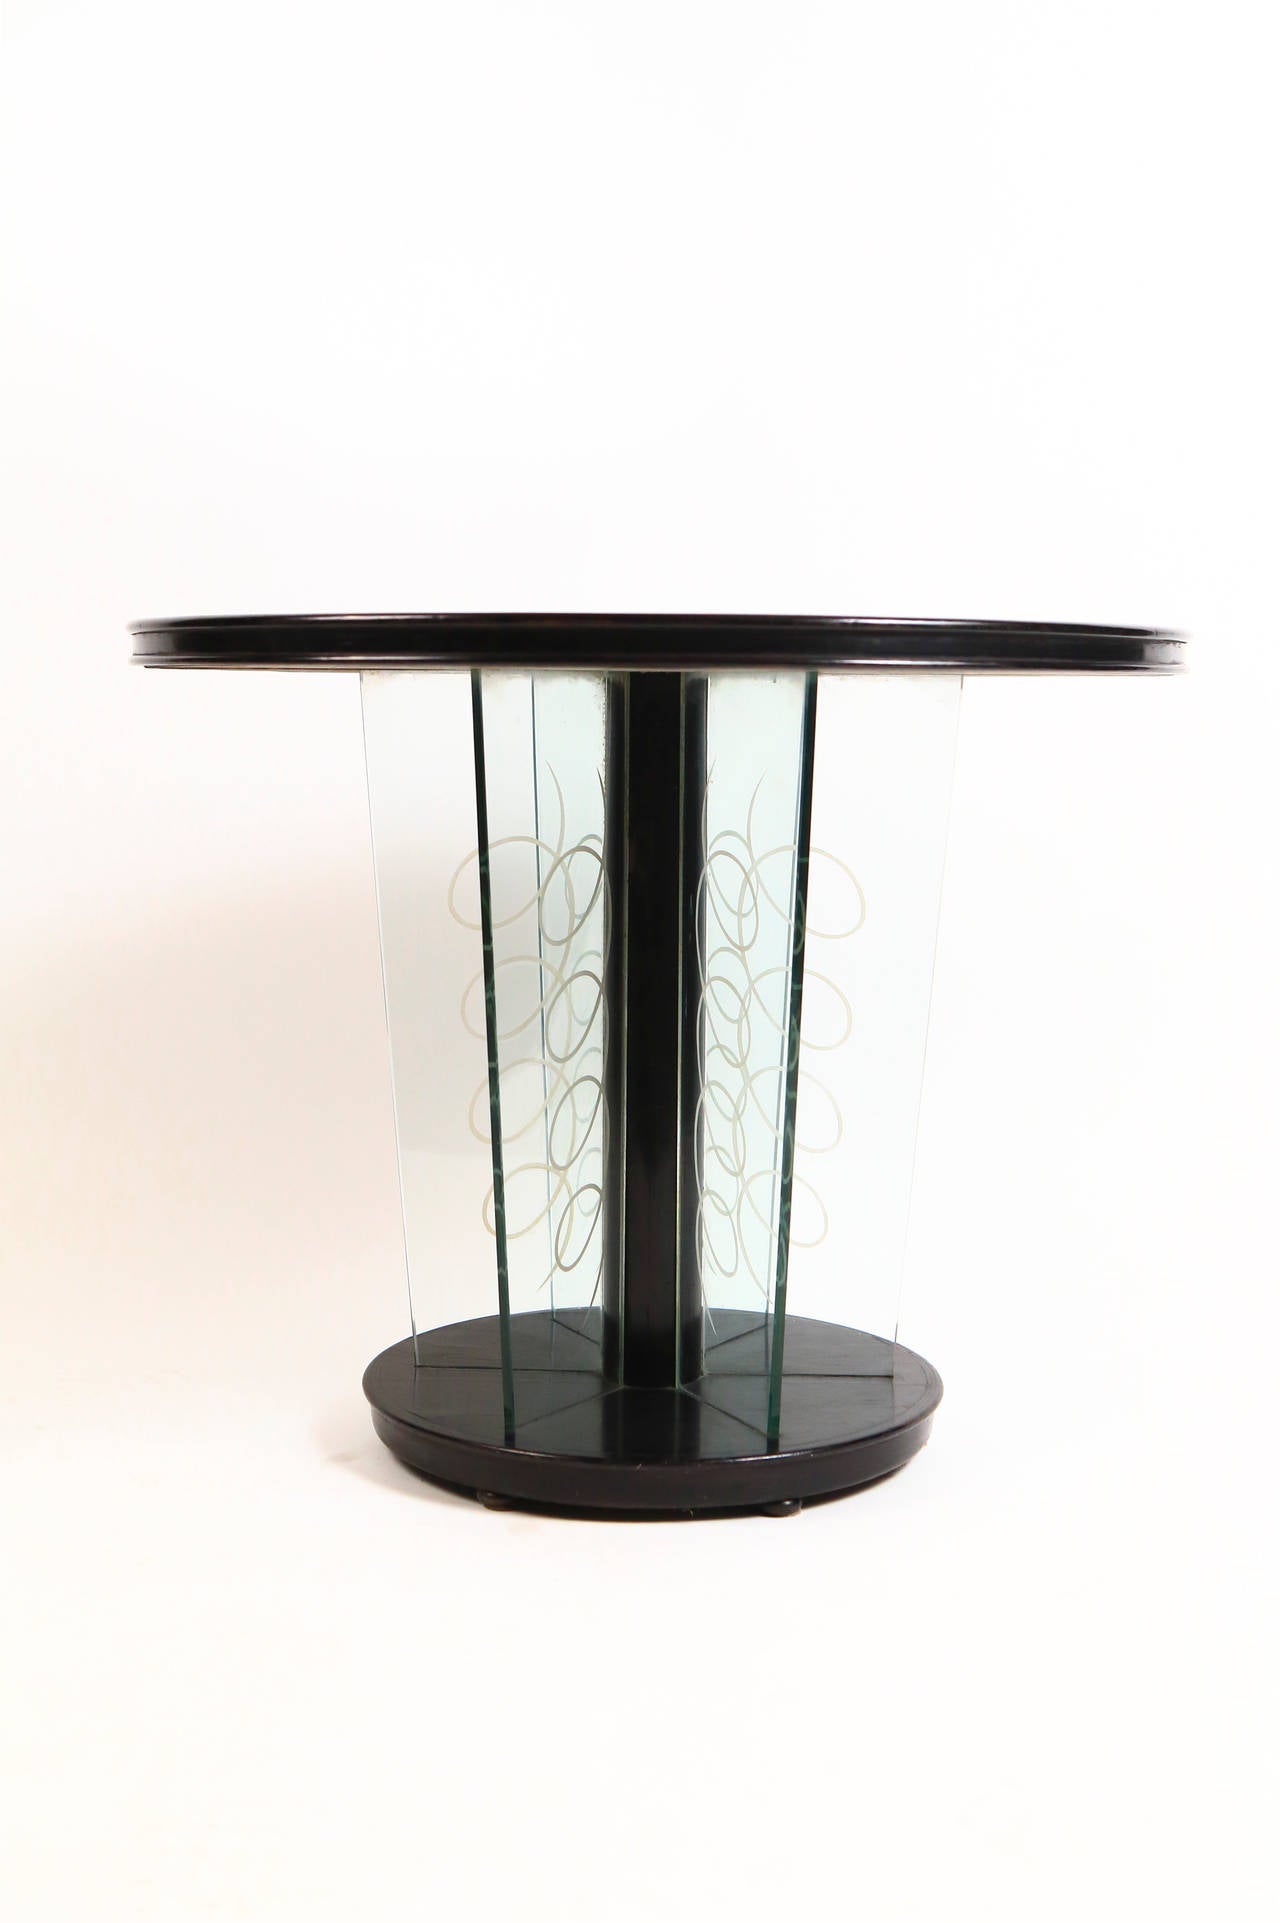 Italian Art deco side table wood and glass, By Brusotti Milano Italy.1930's.